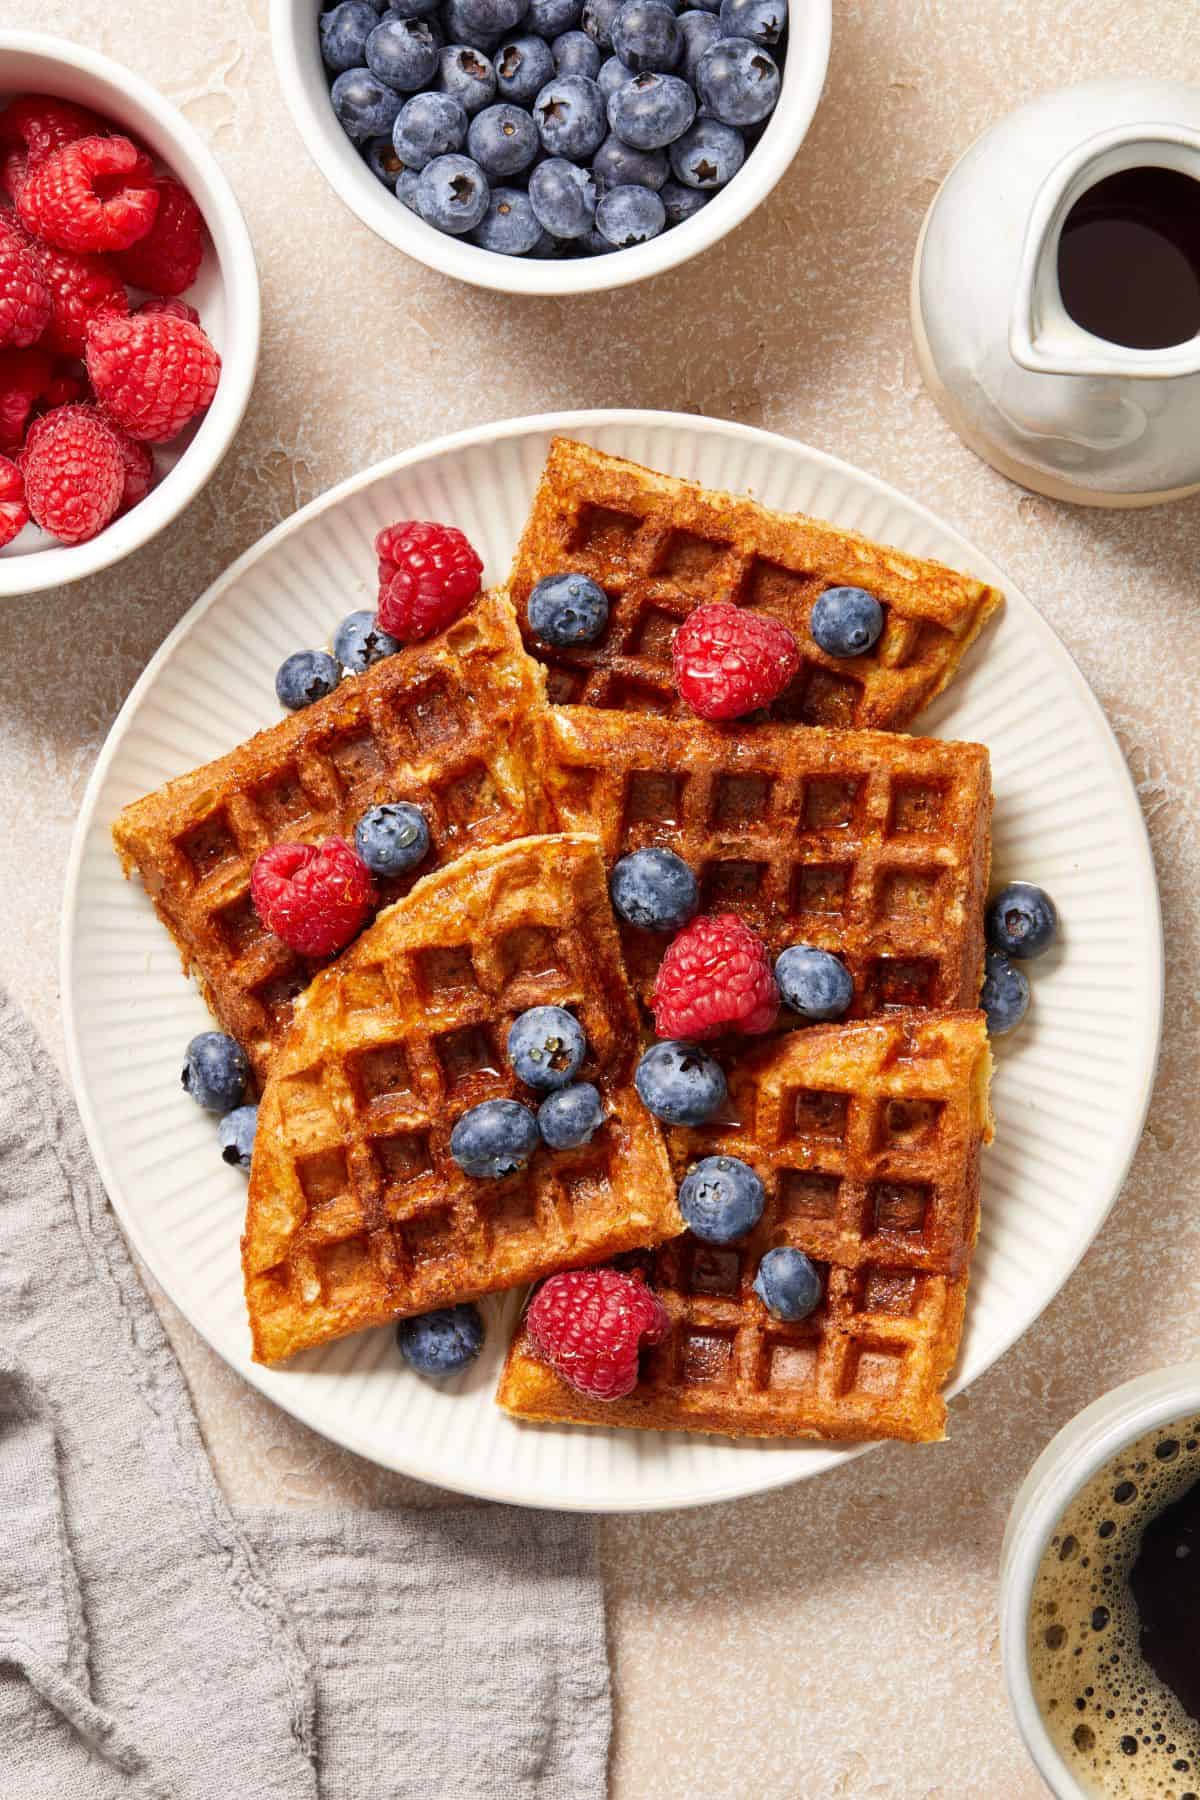 Round white plate with a serve of oat flour waffles, garnished with some raspberries and blueberries.